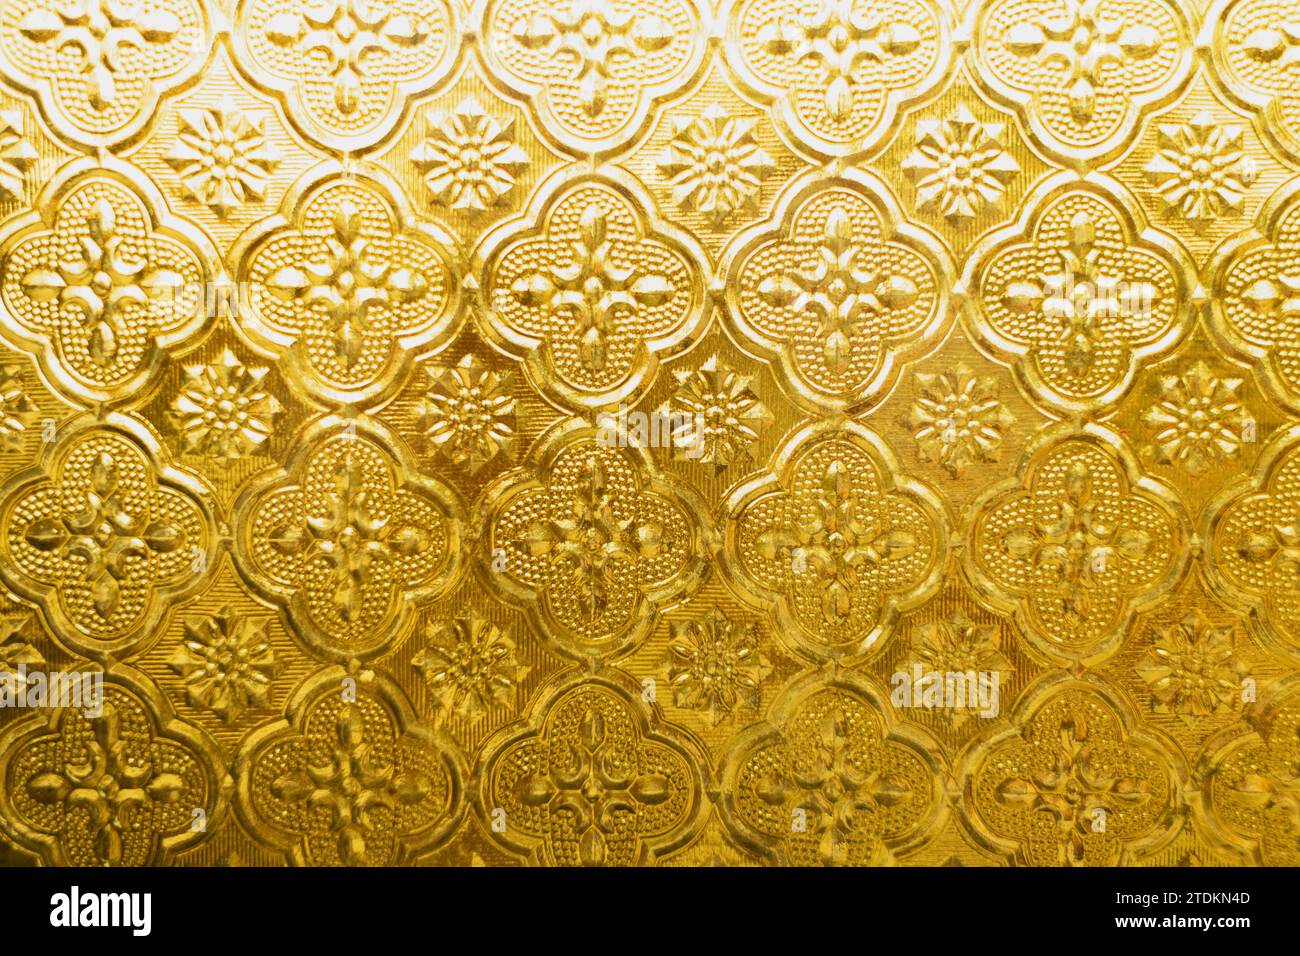 Beautiful golden yellow colored glass decoration with asian style embossing texture pattern for traditional vintage temple architecture background Stock Photo